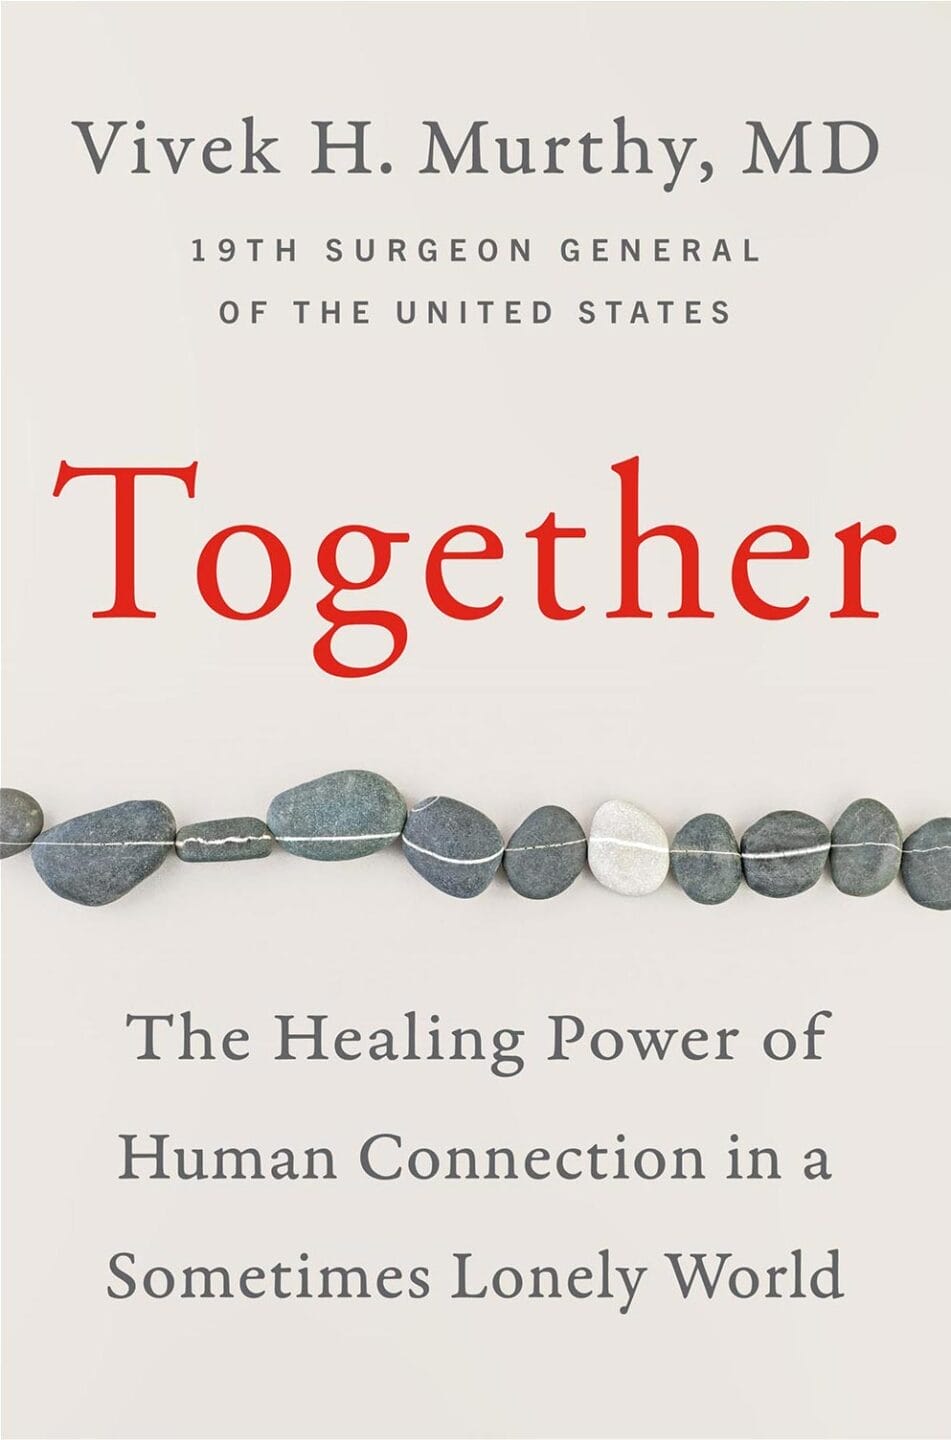 The cover of Vivek Murthy's book, "Together: The Healing Power of Human Connection in a Sometimes Lonely World"